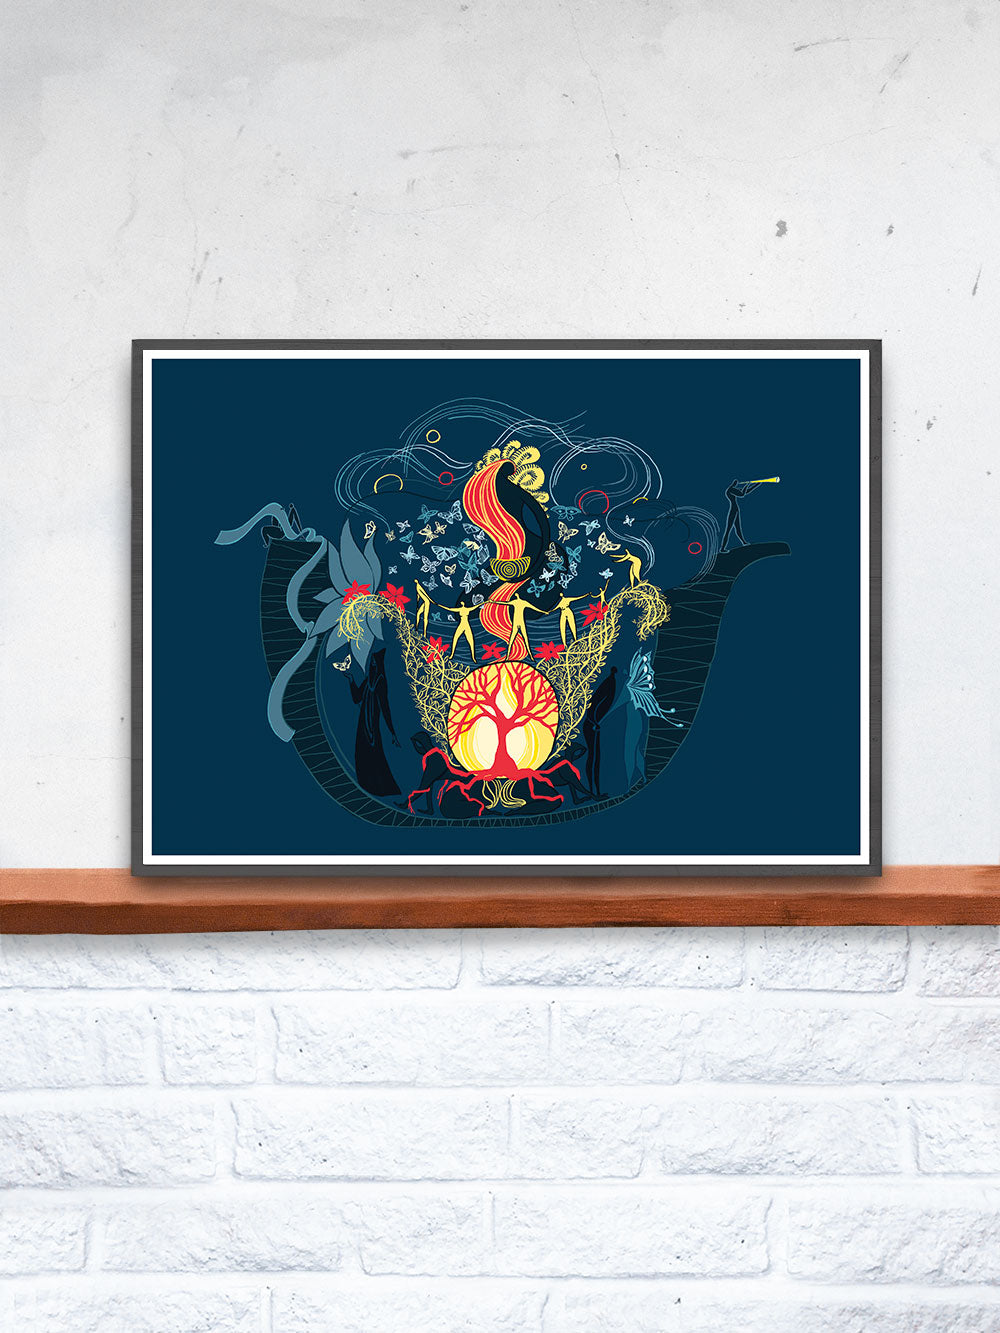 The Arc Illustration Graphic Print in a frame on a shelf